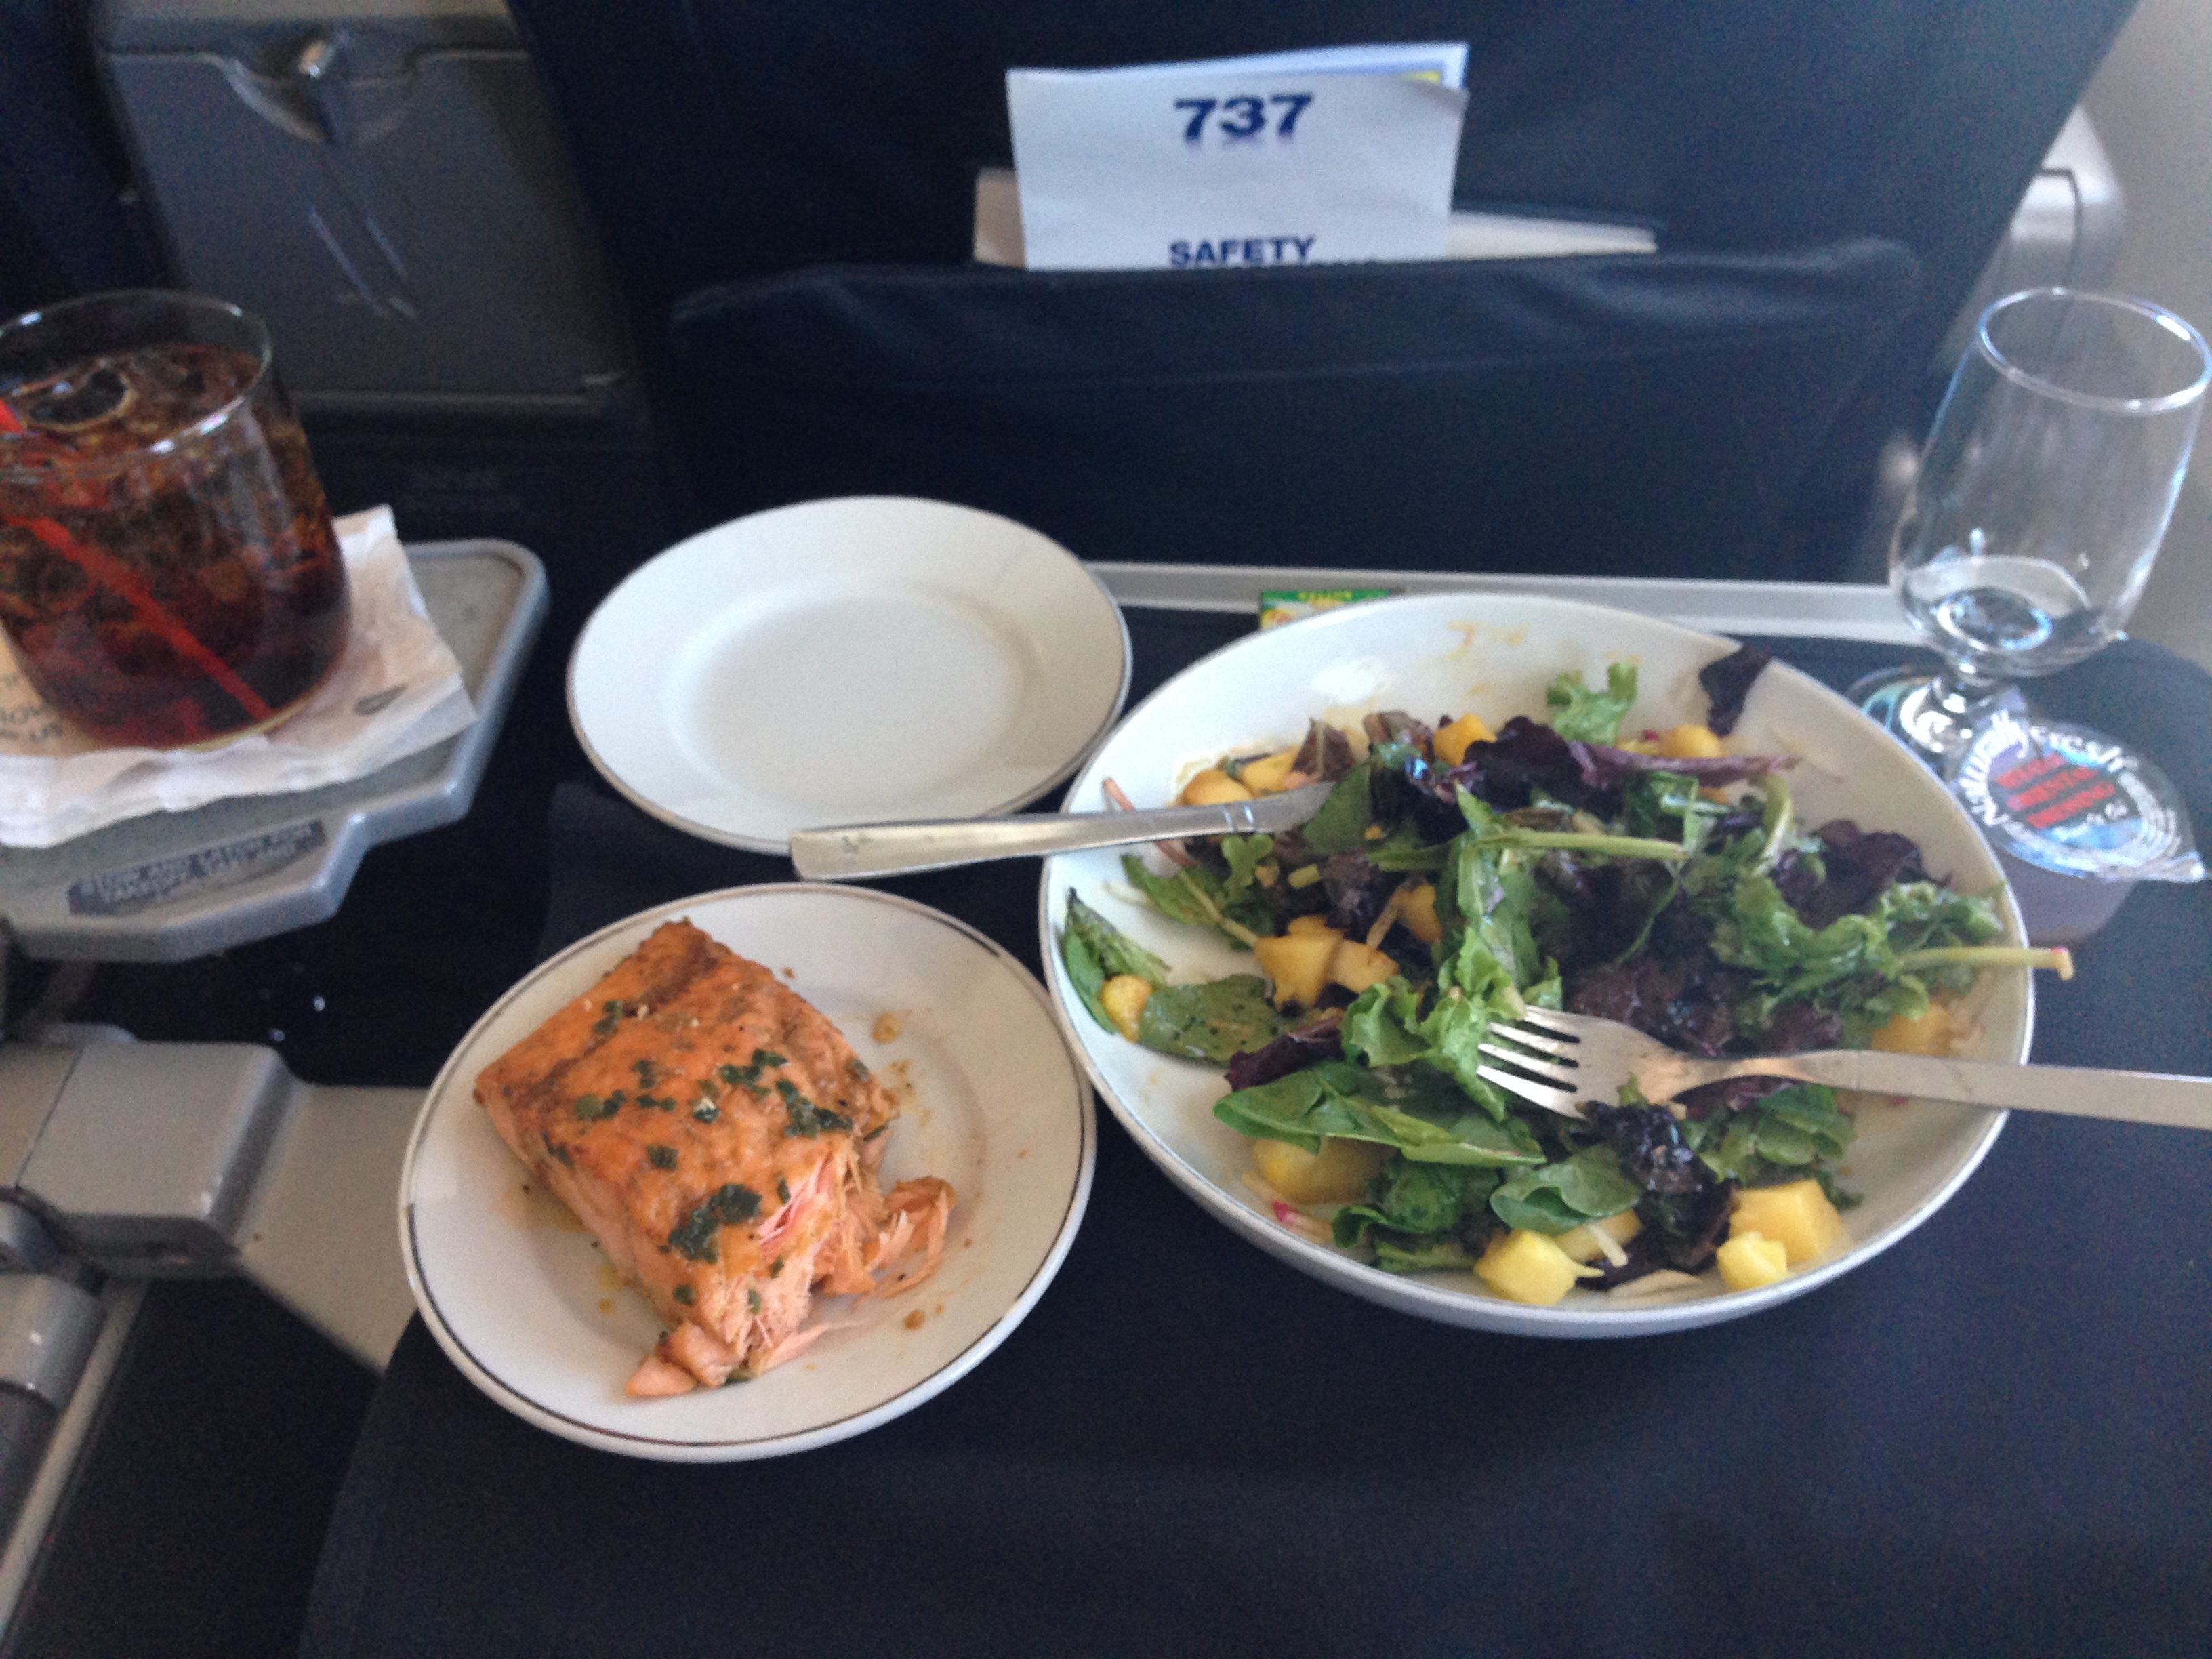 American Airlines to modify first class meal policy following complaints